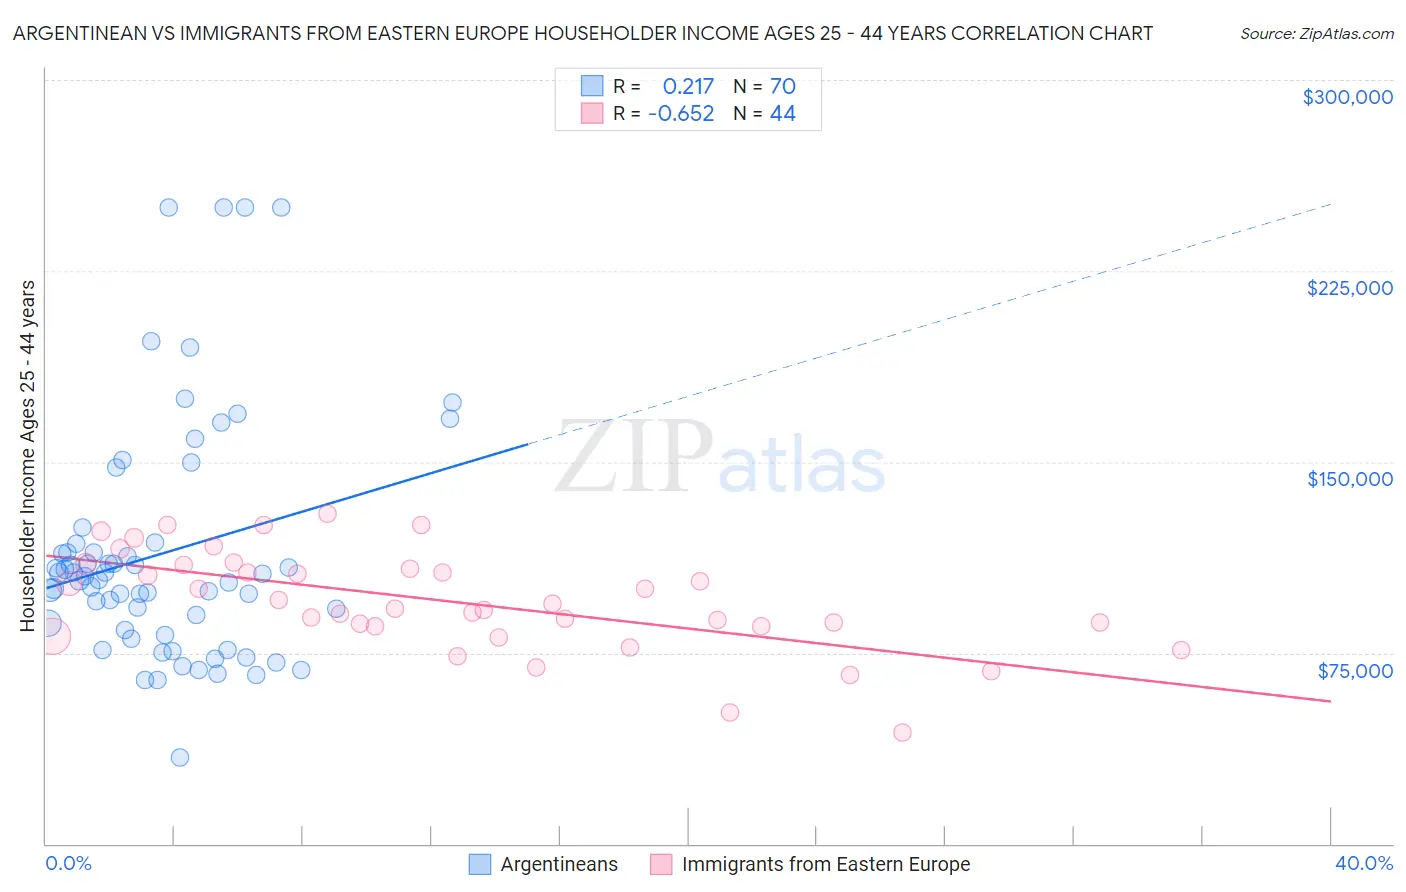 Argentinean vs Immigrants from Eastern Europe Householder Income Ages 25 - 44 years